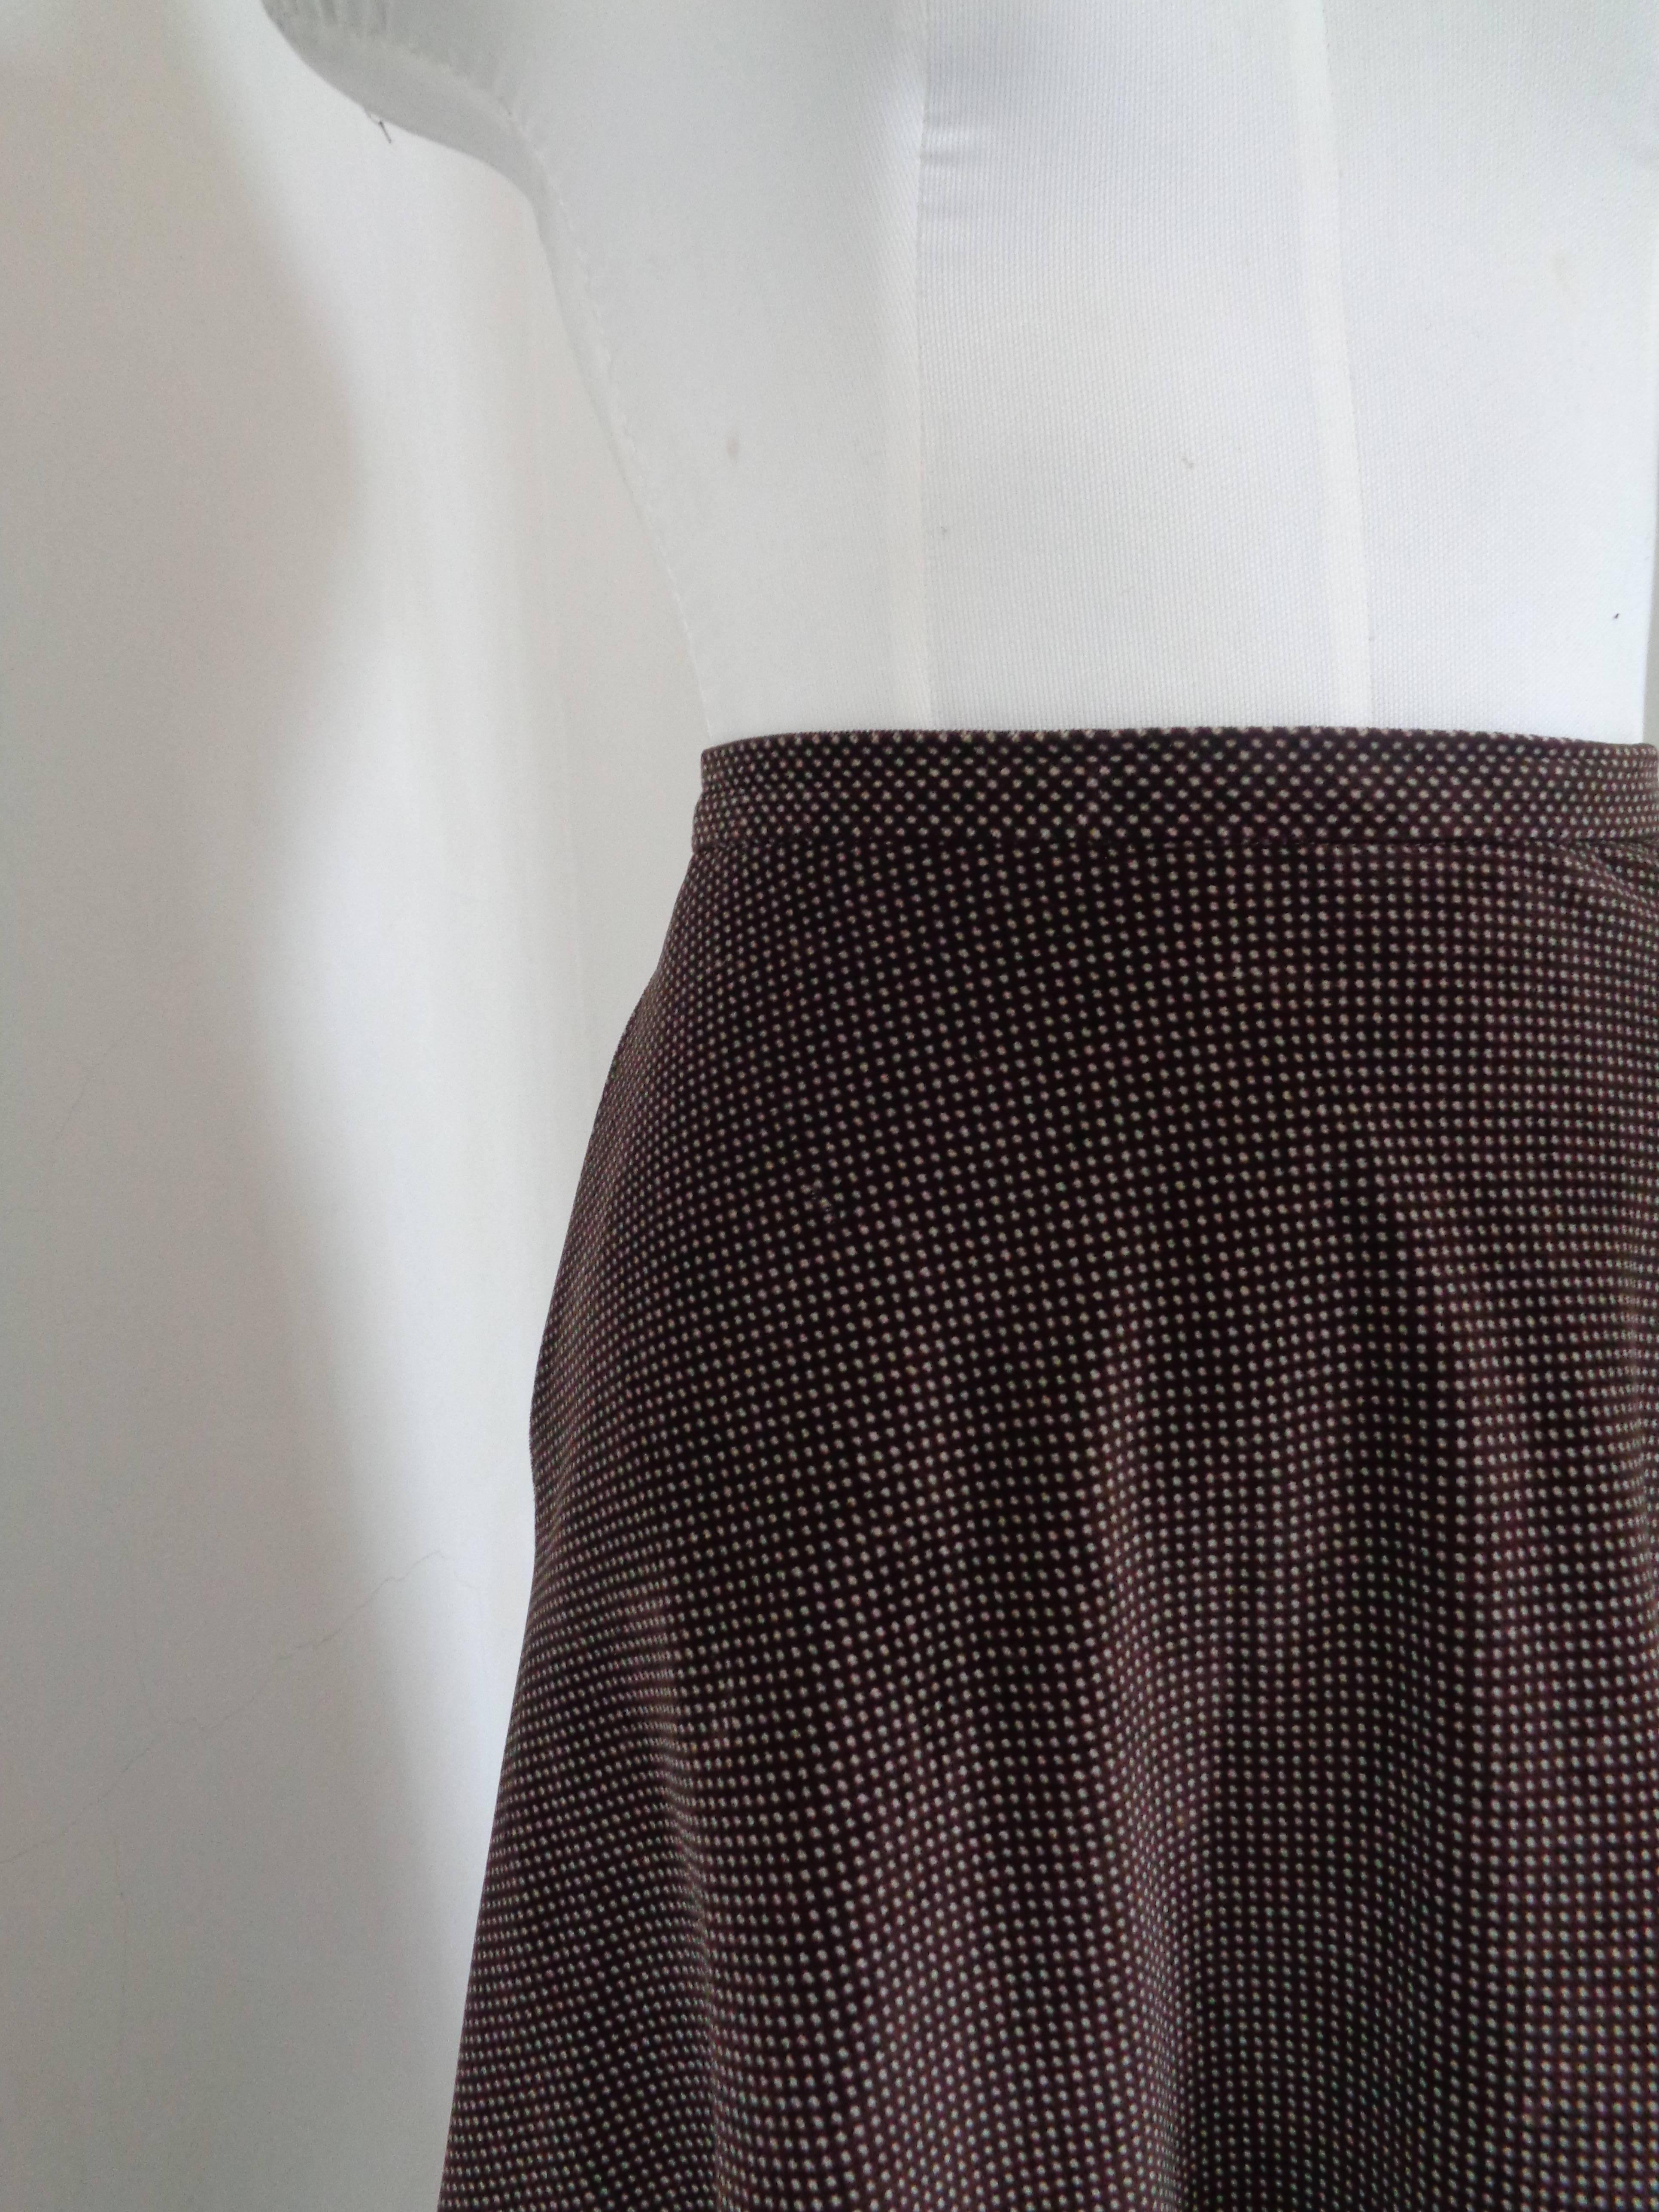 Giorgio Armani Brown white Pois Skirt

Totally made in italy in size S 